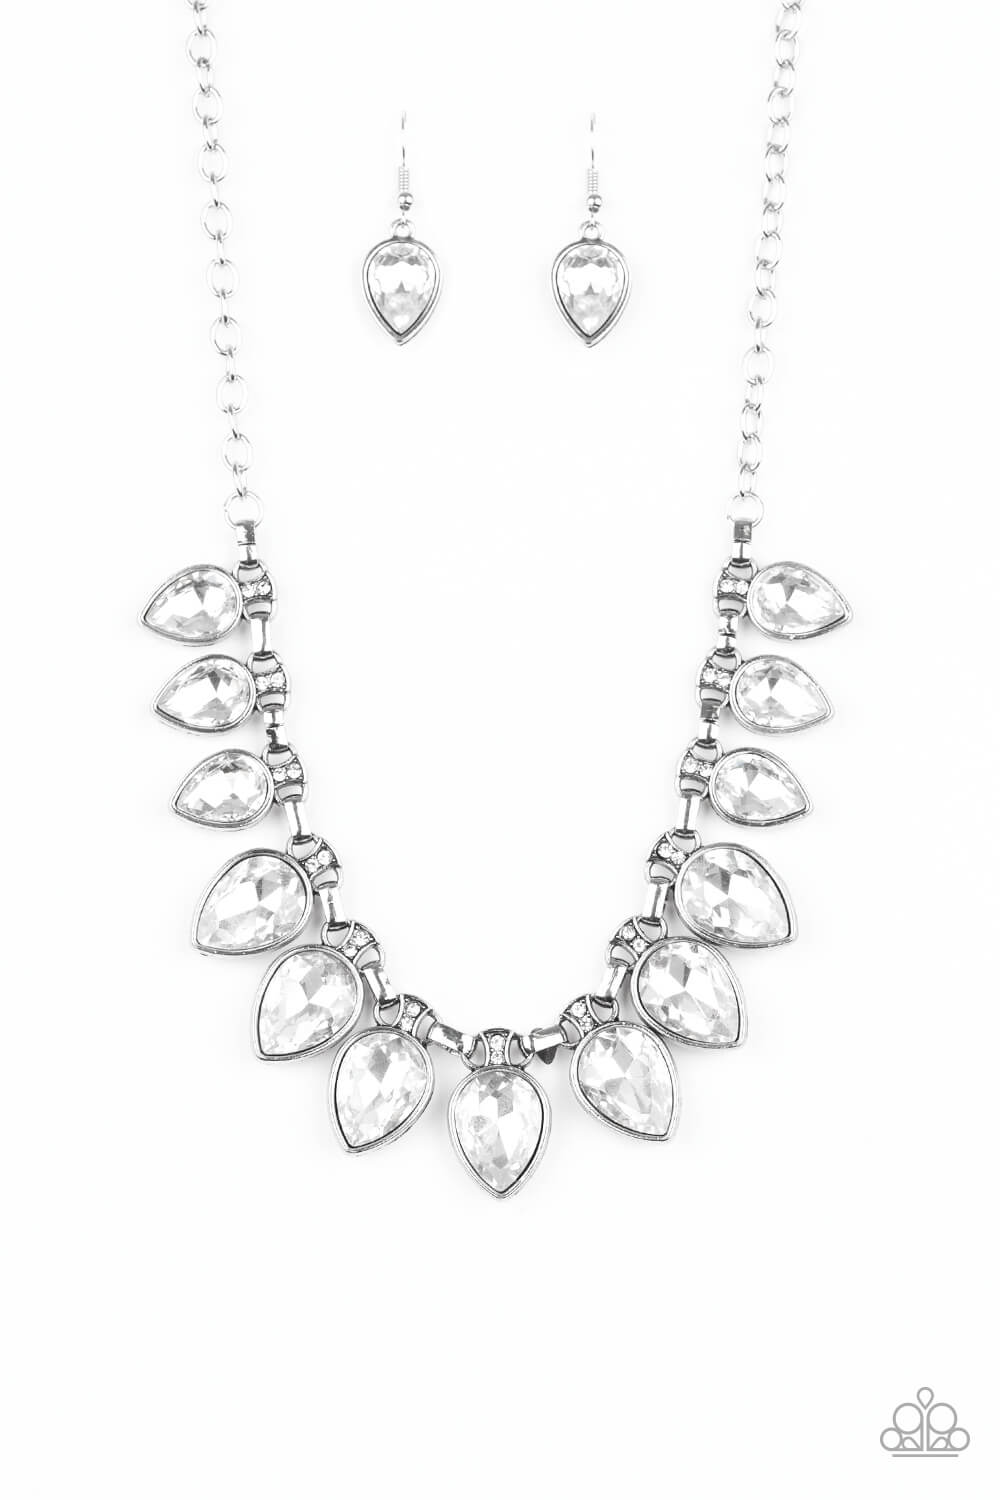 FEARLESS is More - White Necklace Set - Princess Glam Shop